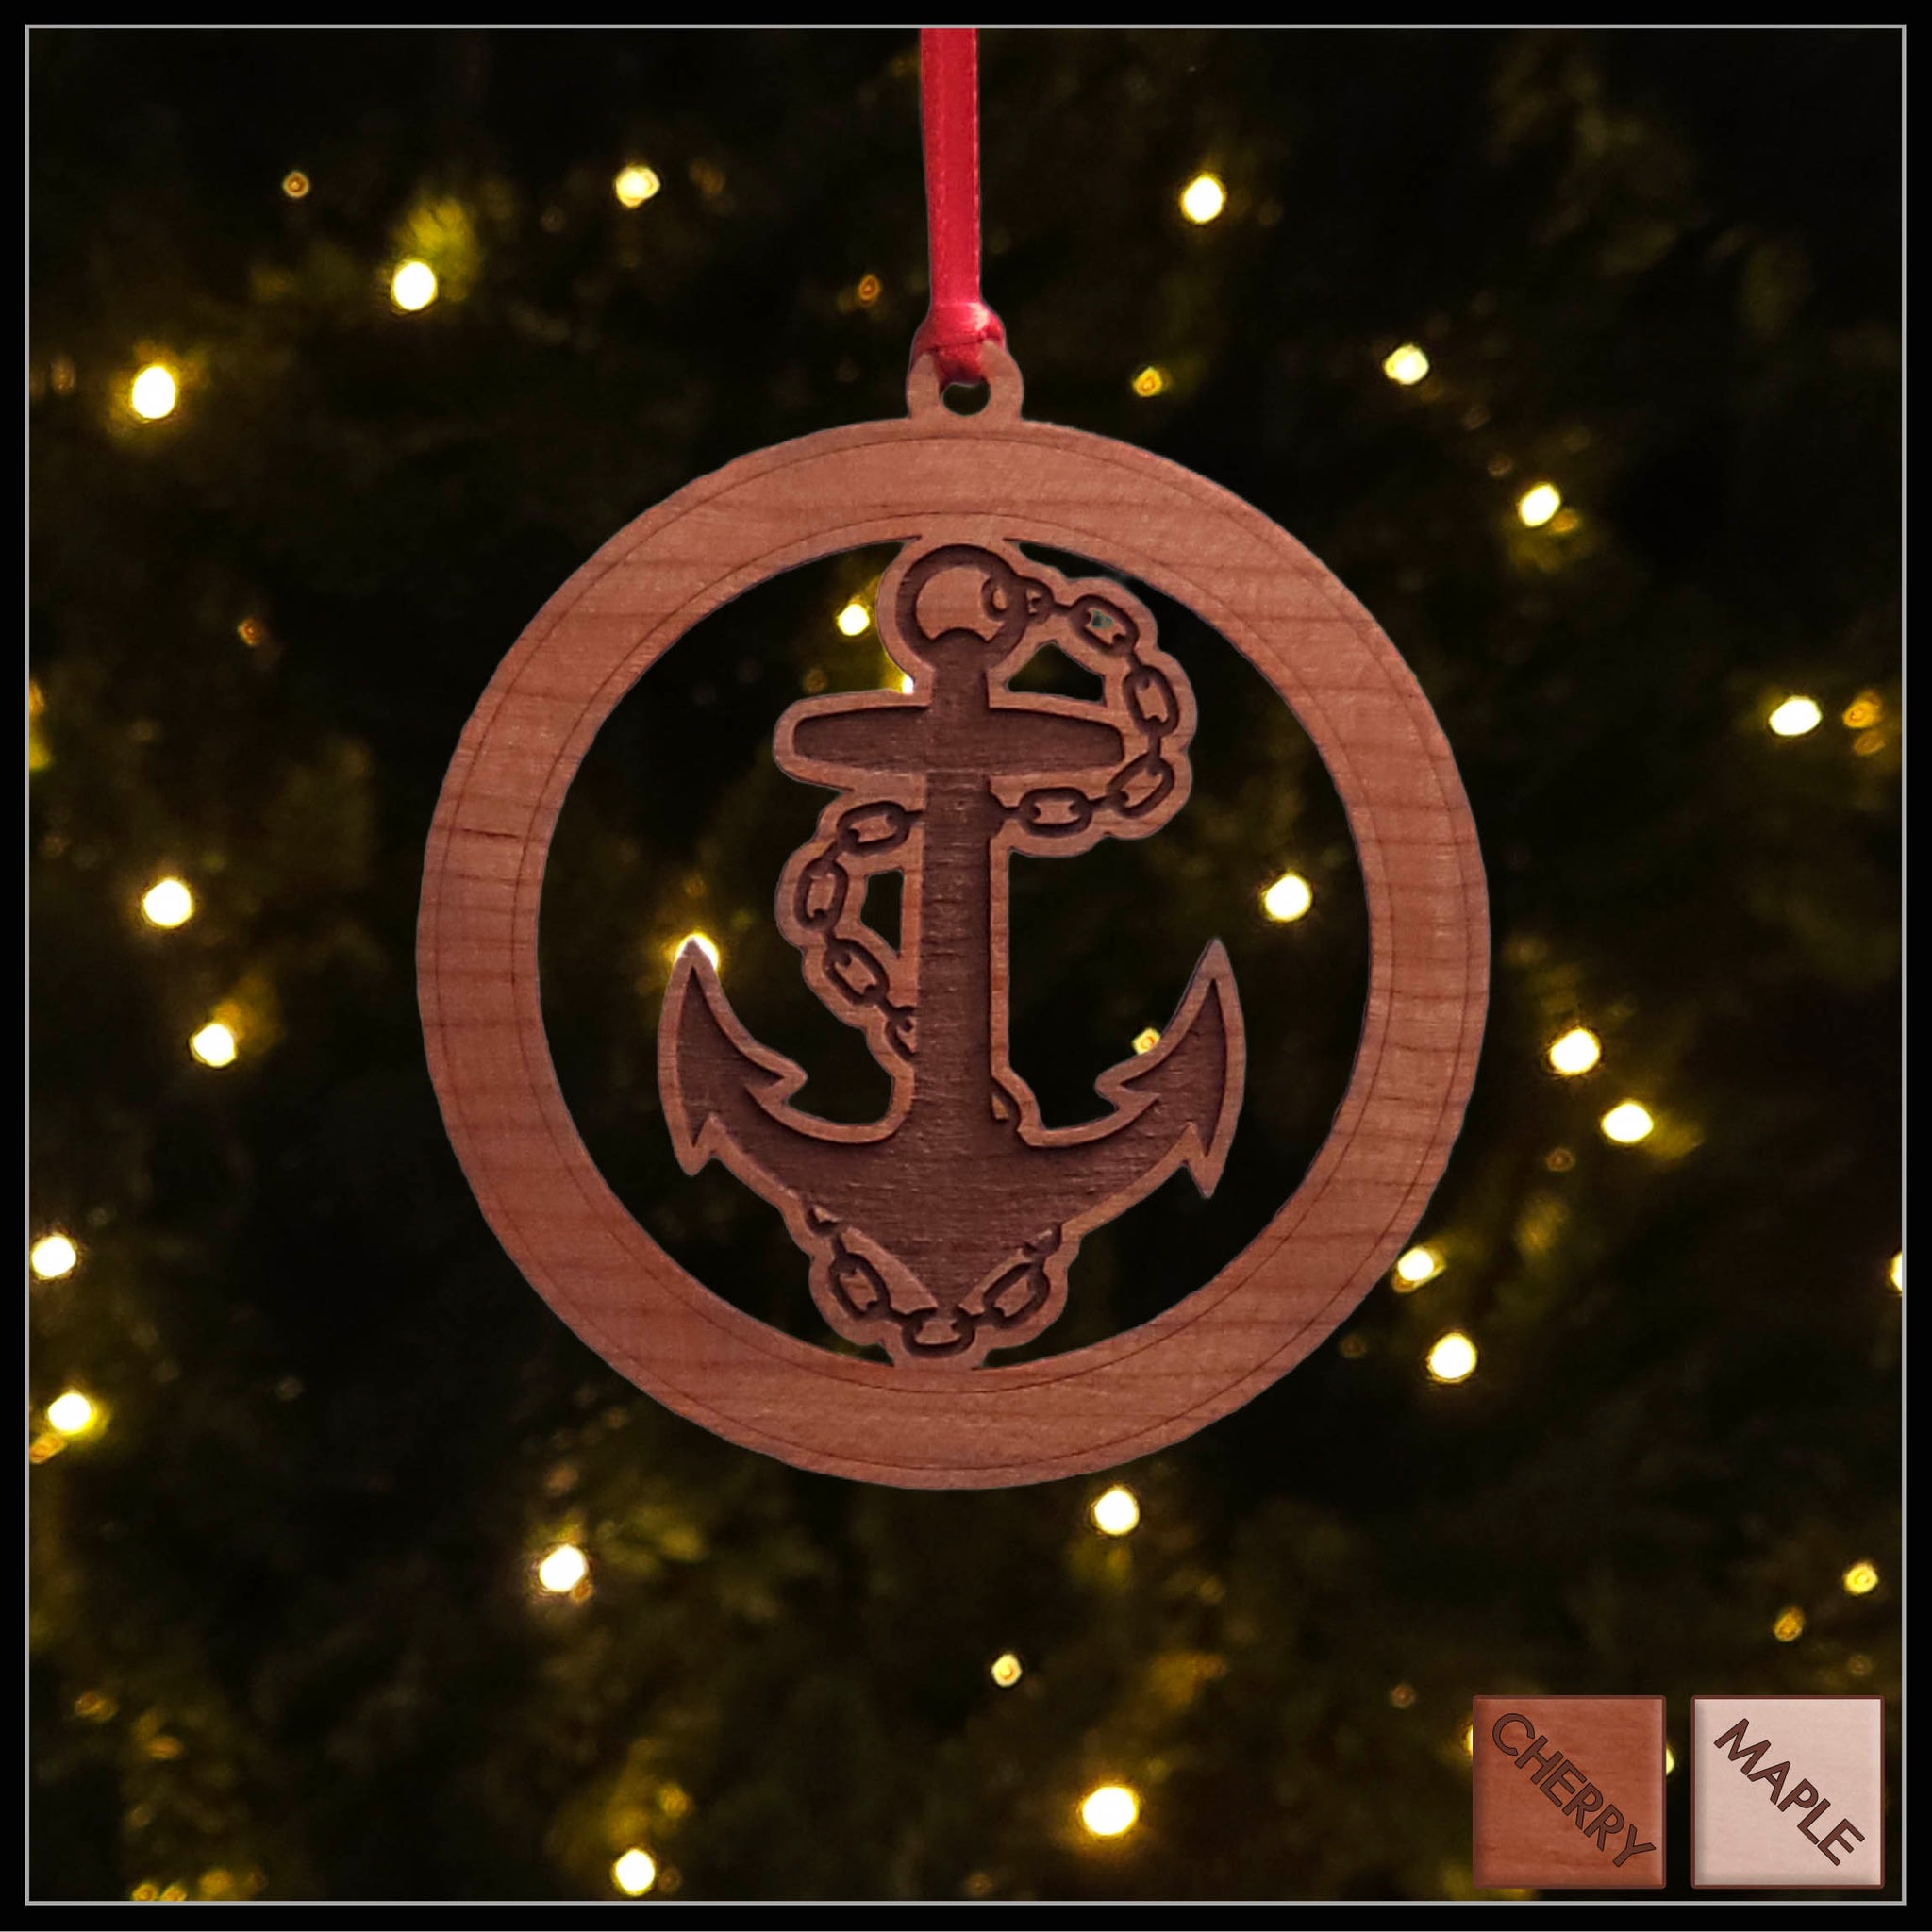 Cherry  Veneer Anchor and Chain Christmas tree ornament - Holiday Decor - Copyright Hues in Glass